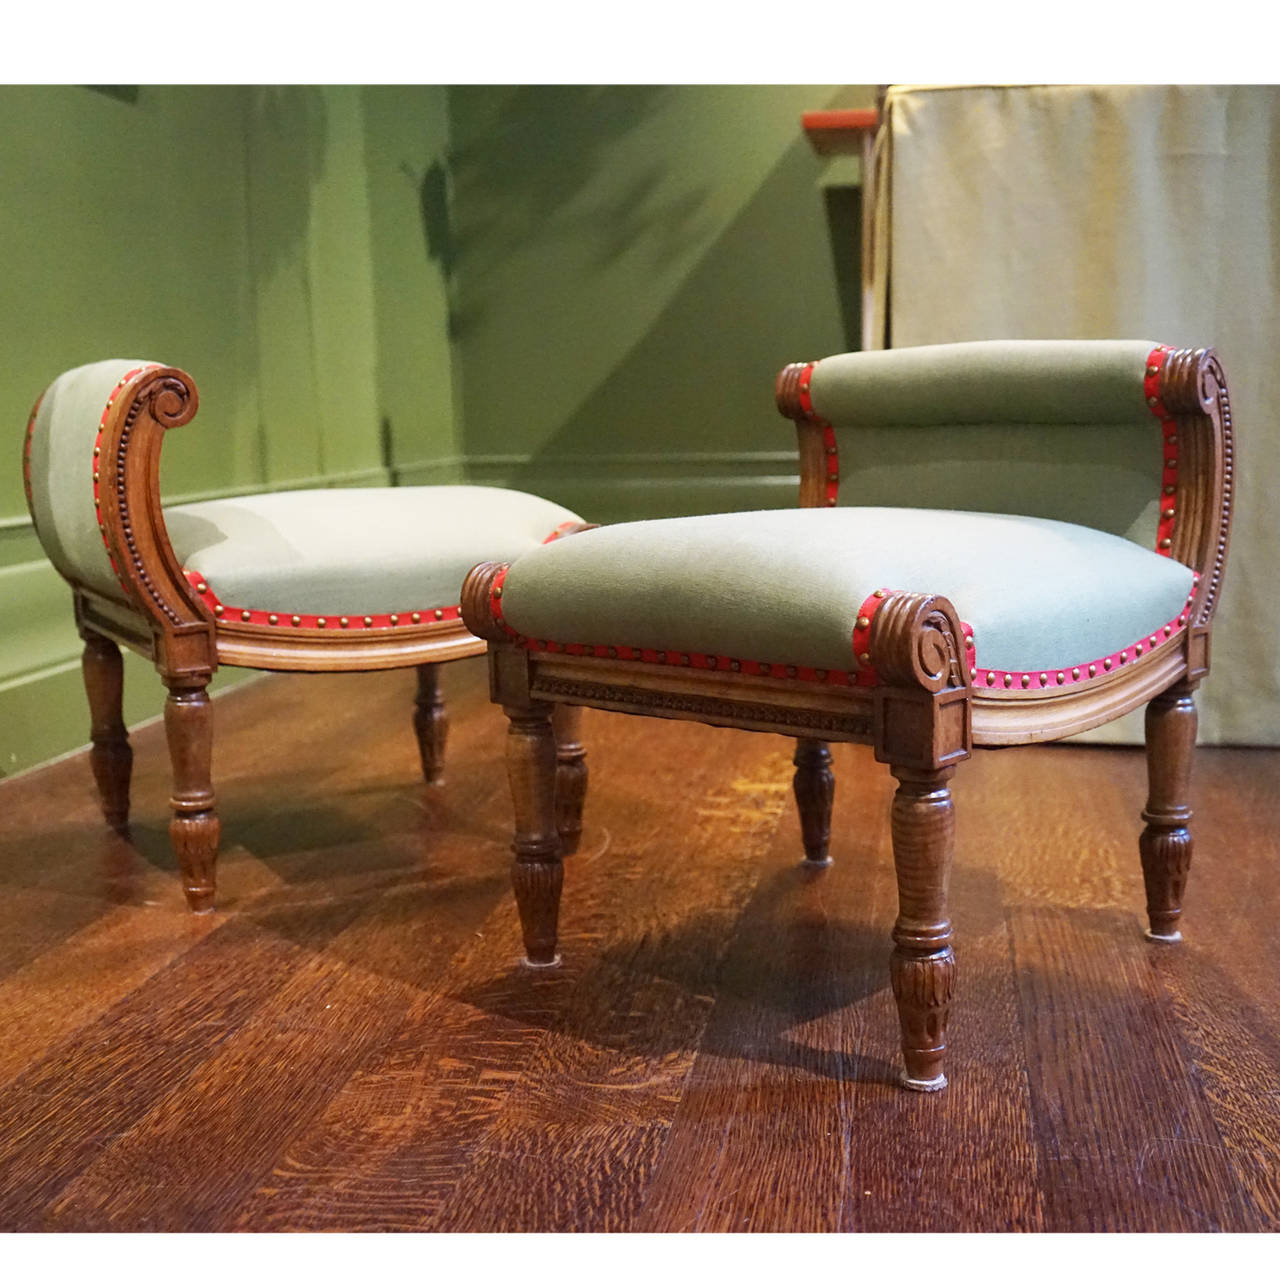 Pair of unusual 19th century French carved walnut footstools.  Detailed carving, newly upholstered in linen with grosgrain trim and antiqued brass nail heads.